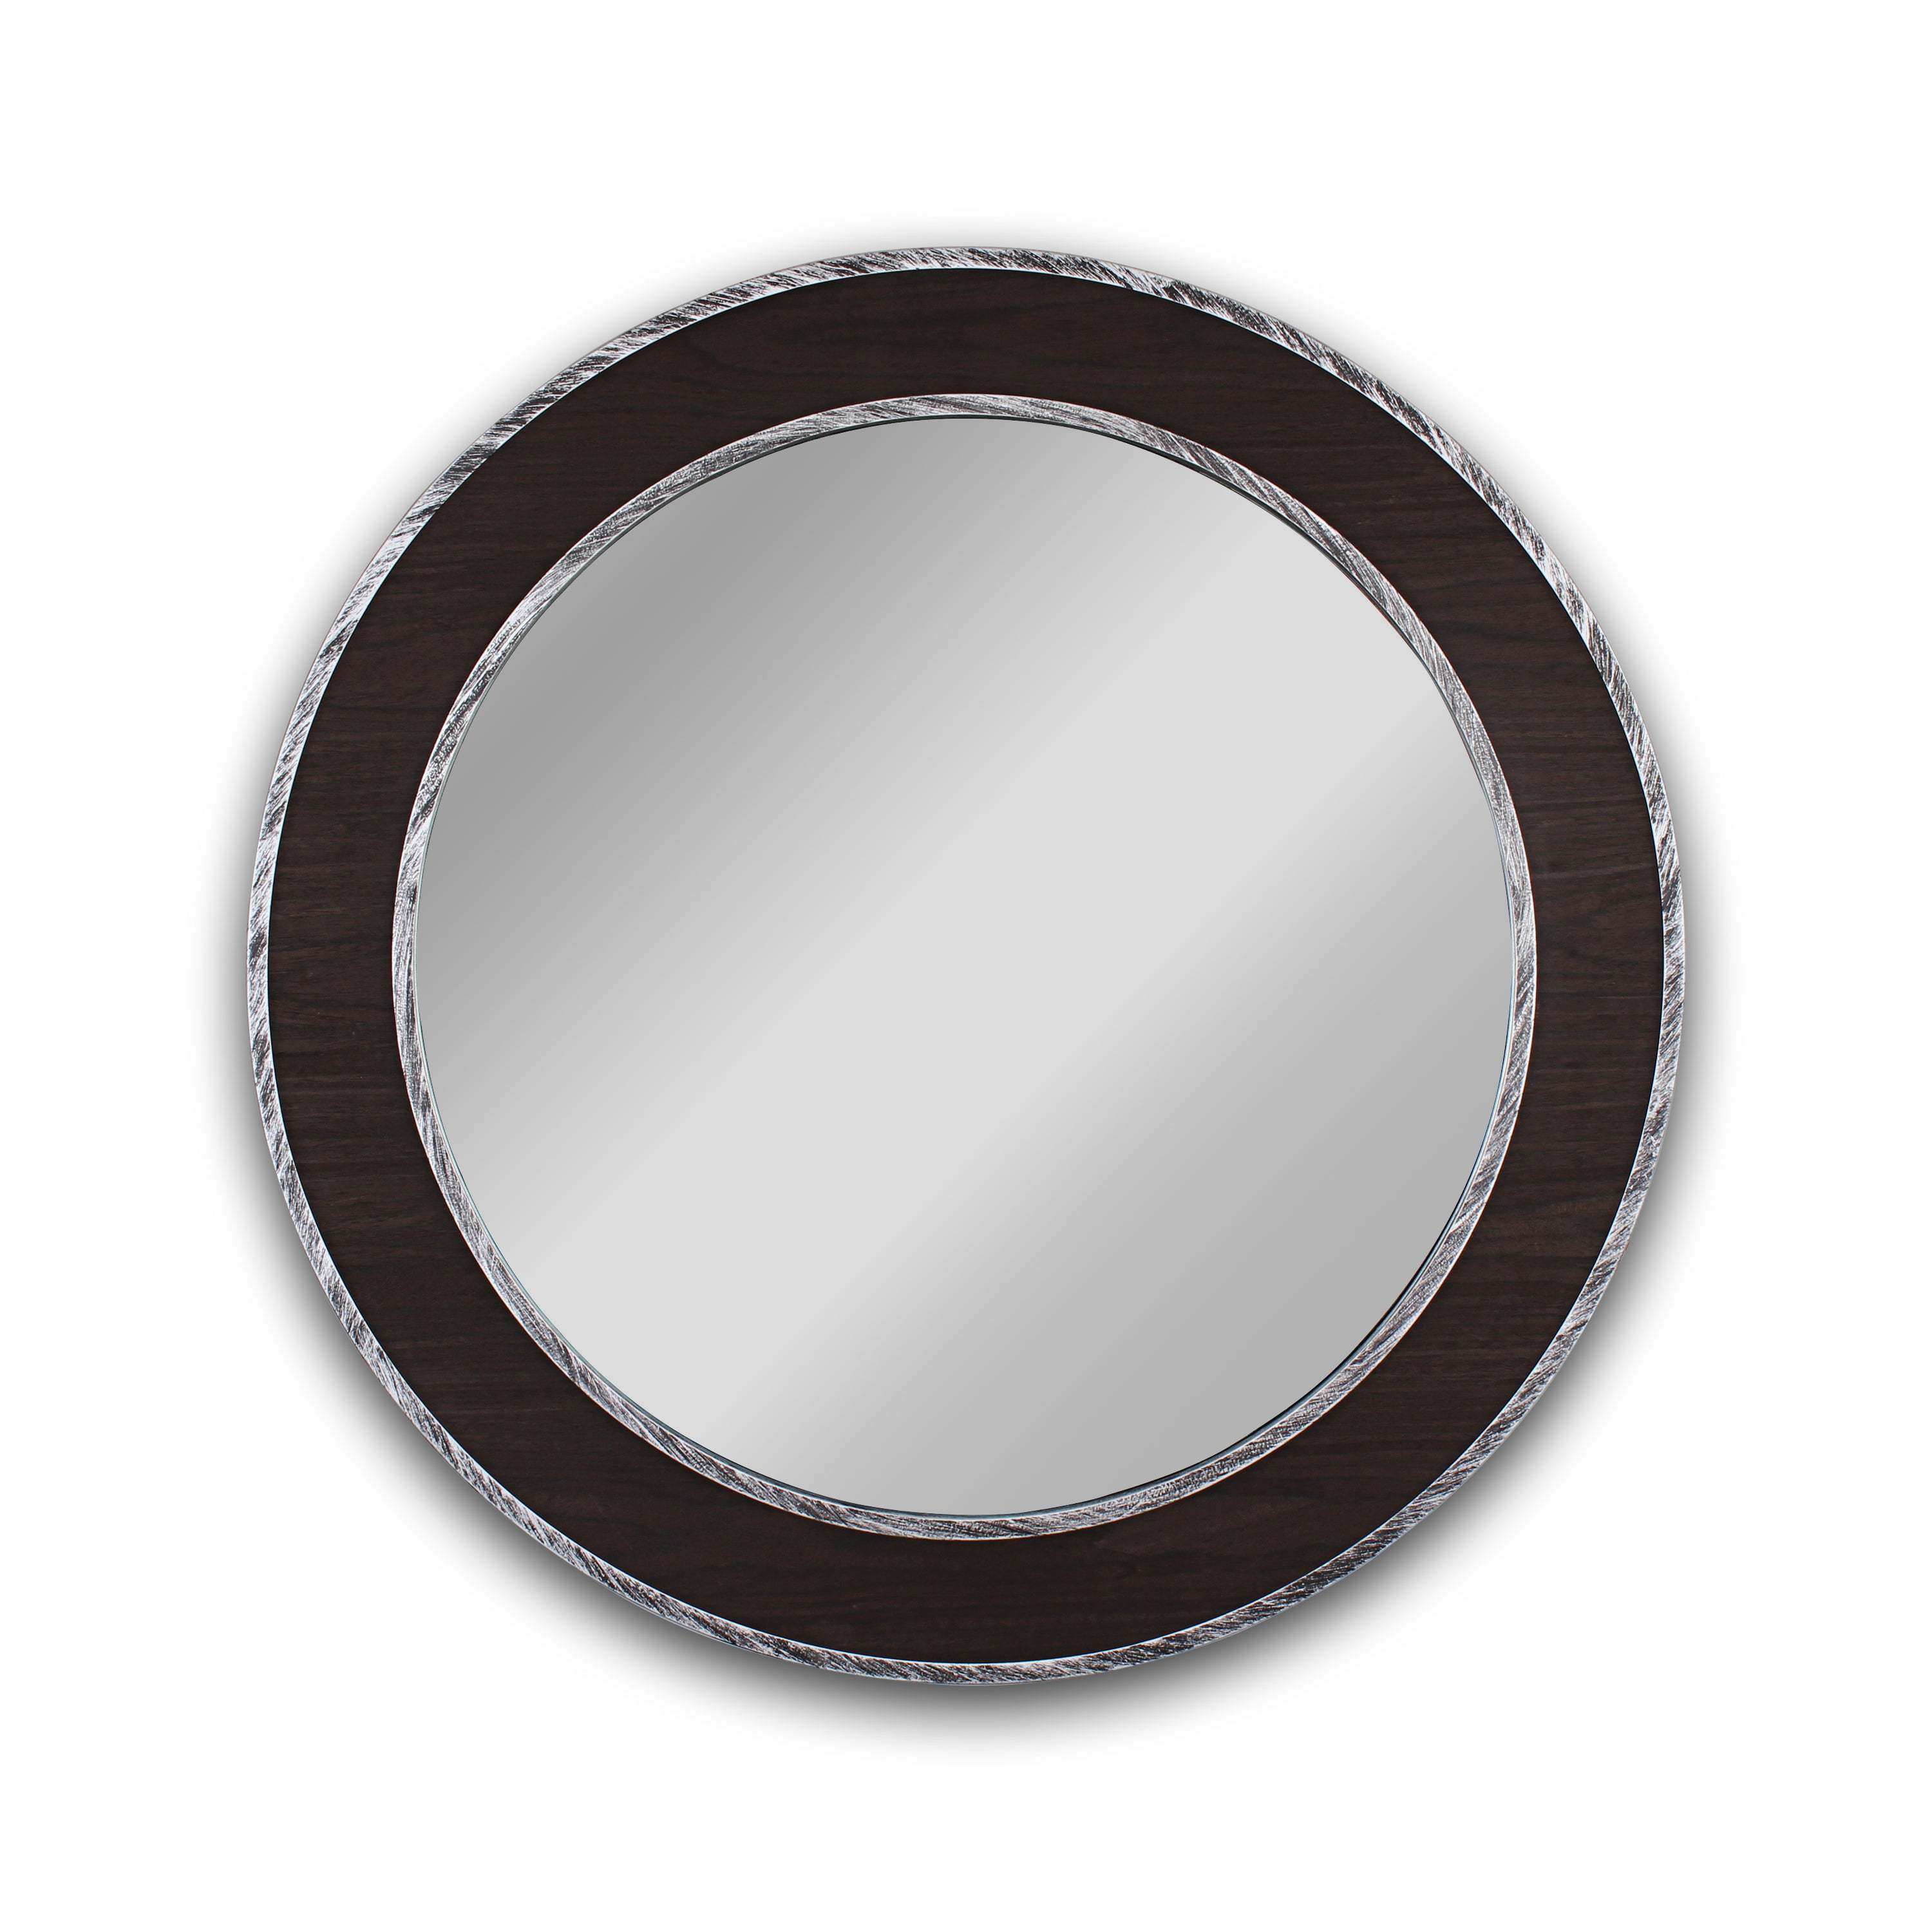 RADIANCE Goods Vertical Hanging Black-Wood Finish Circle Framed Wall Mirror  30